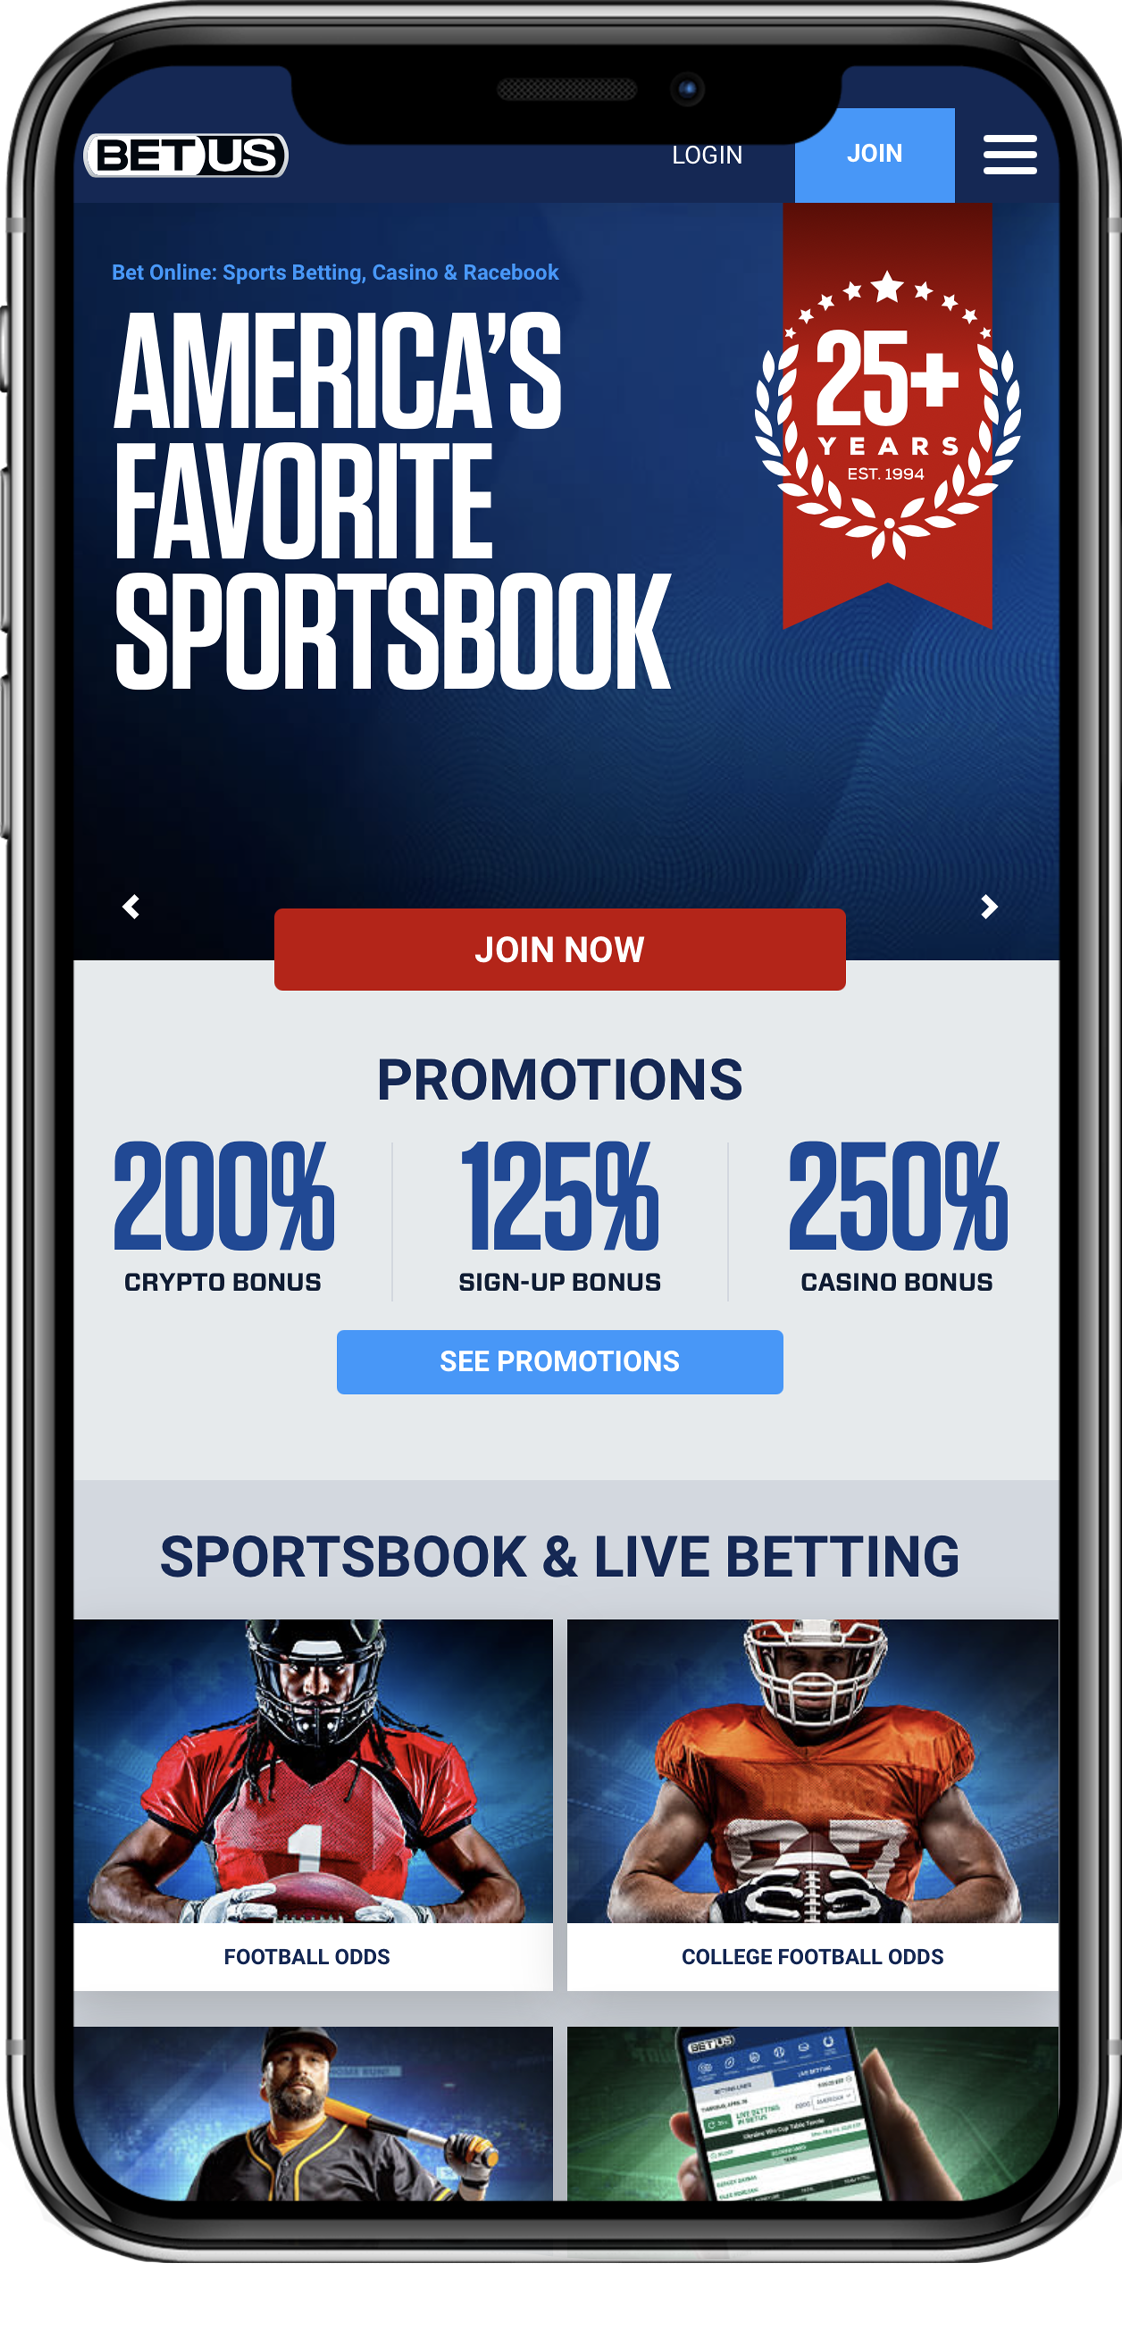 Best online betting sites for ufcu soccer betting odds explained